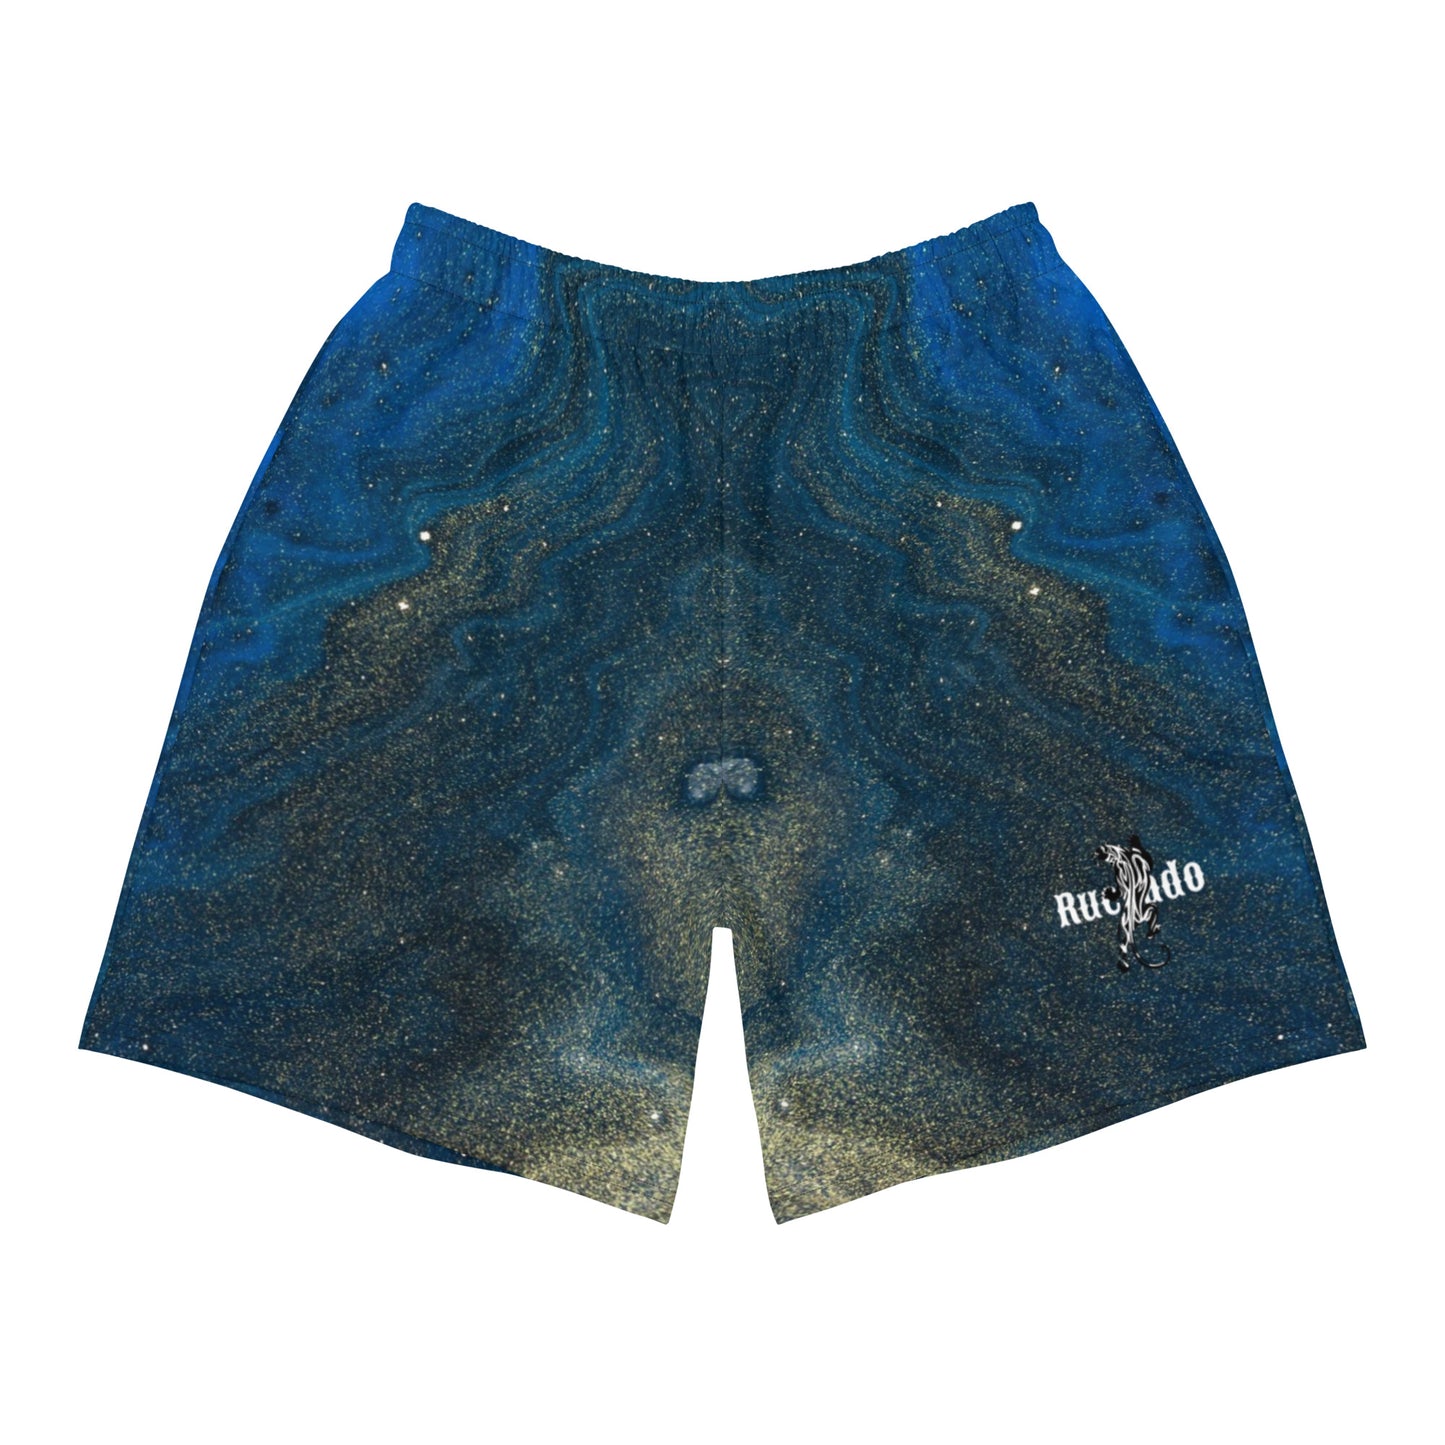 Astral Athletic Shorts